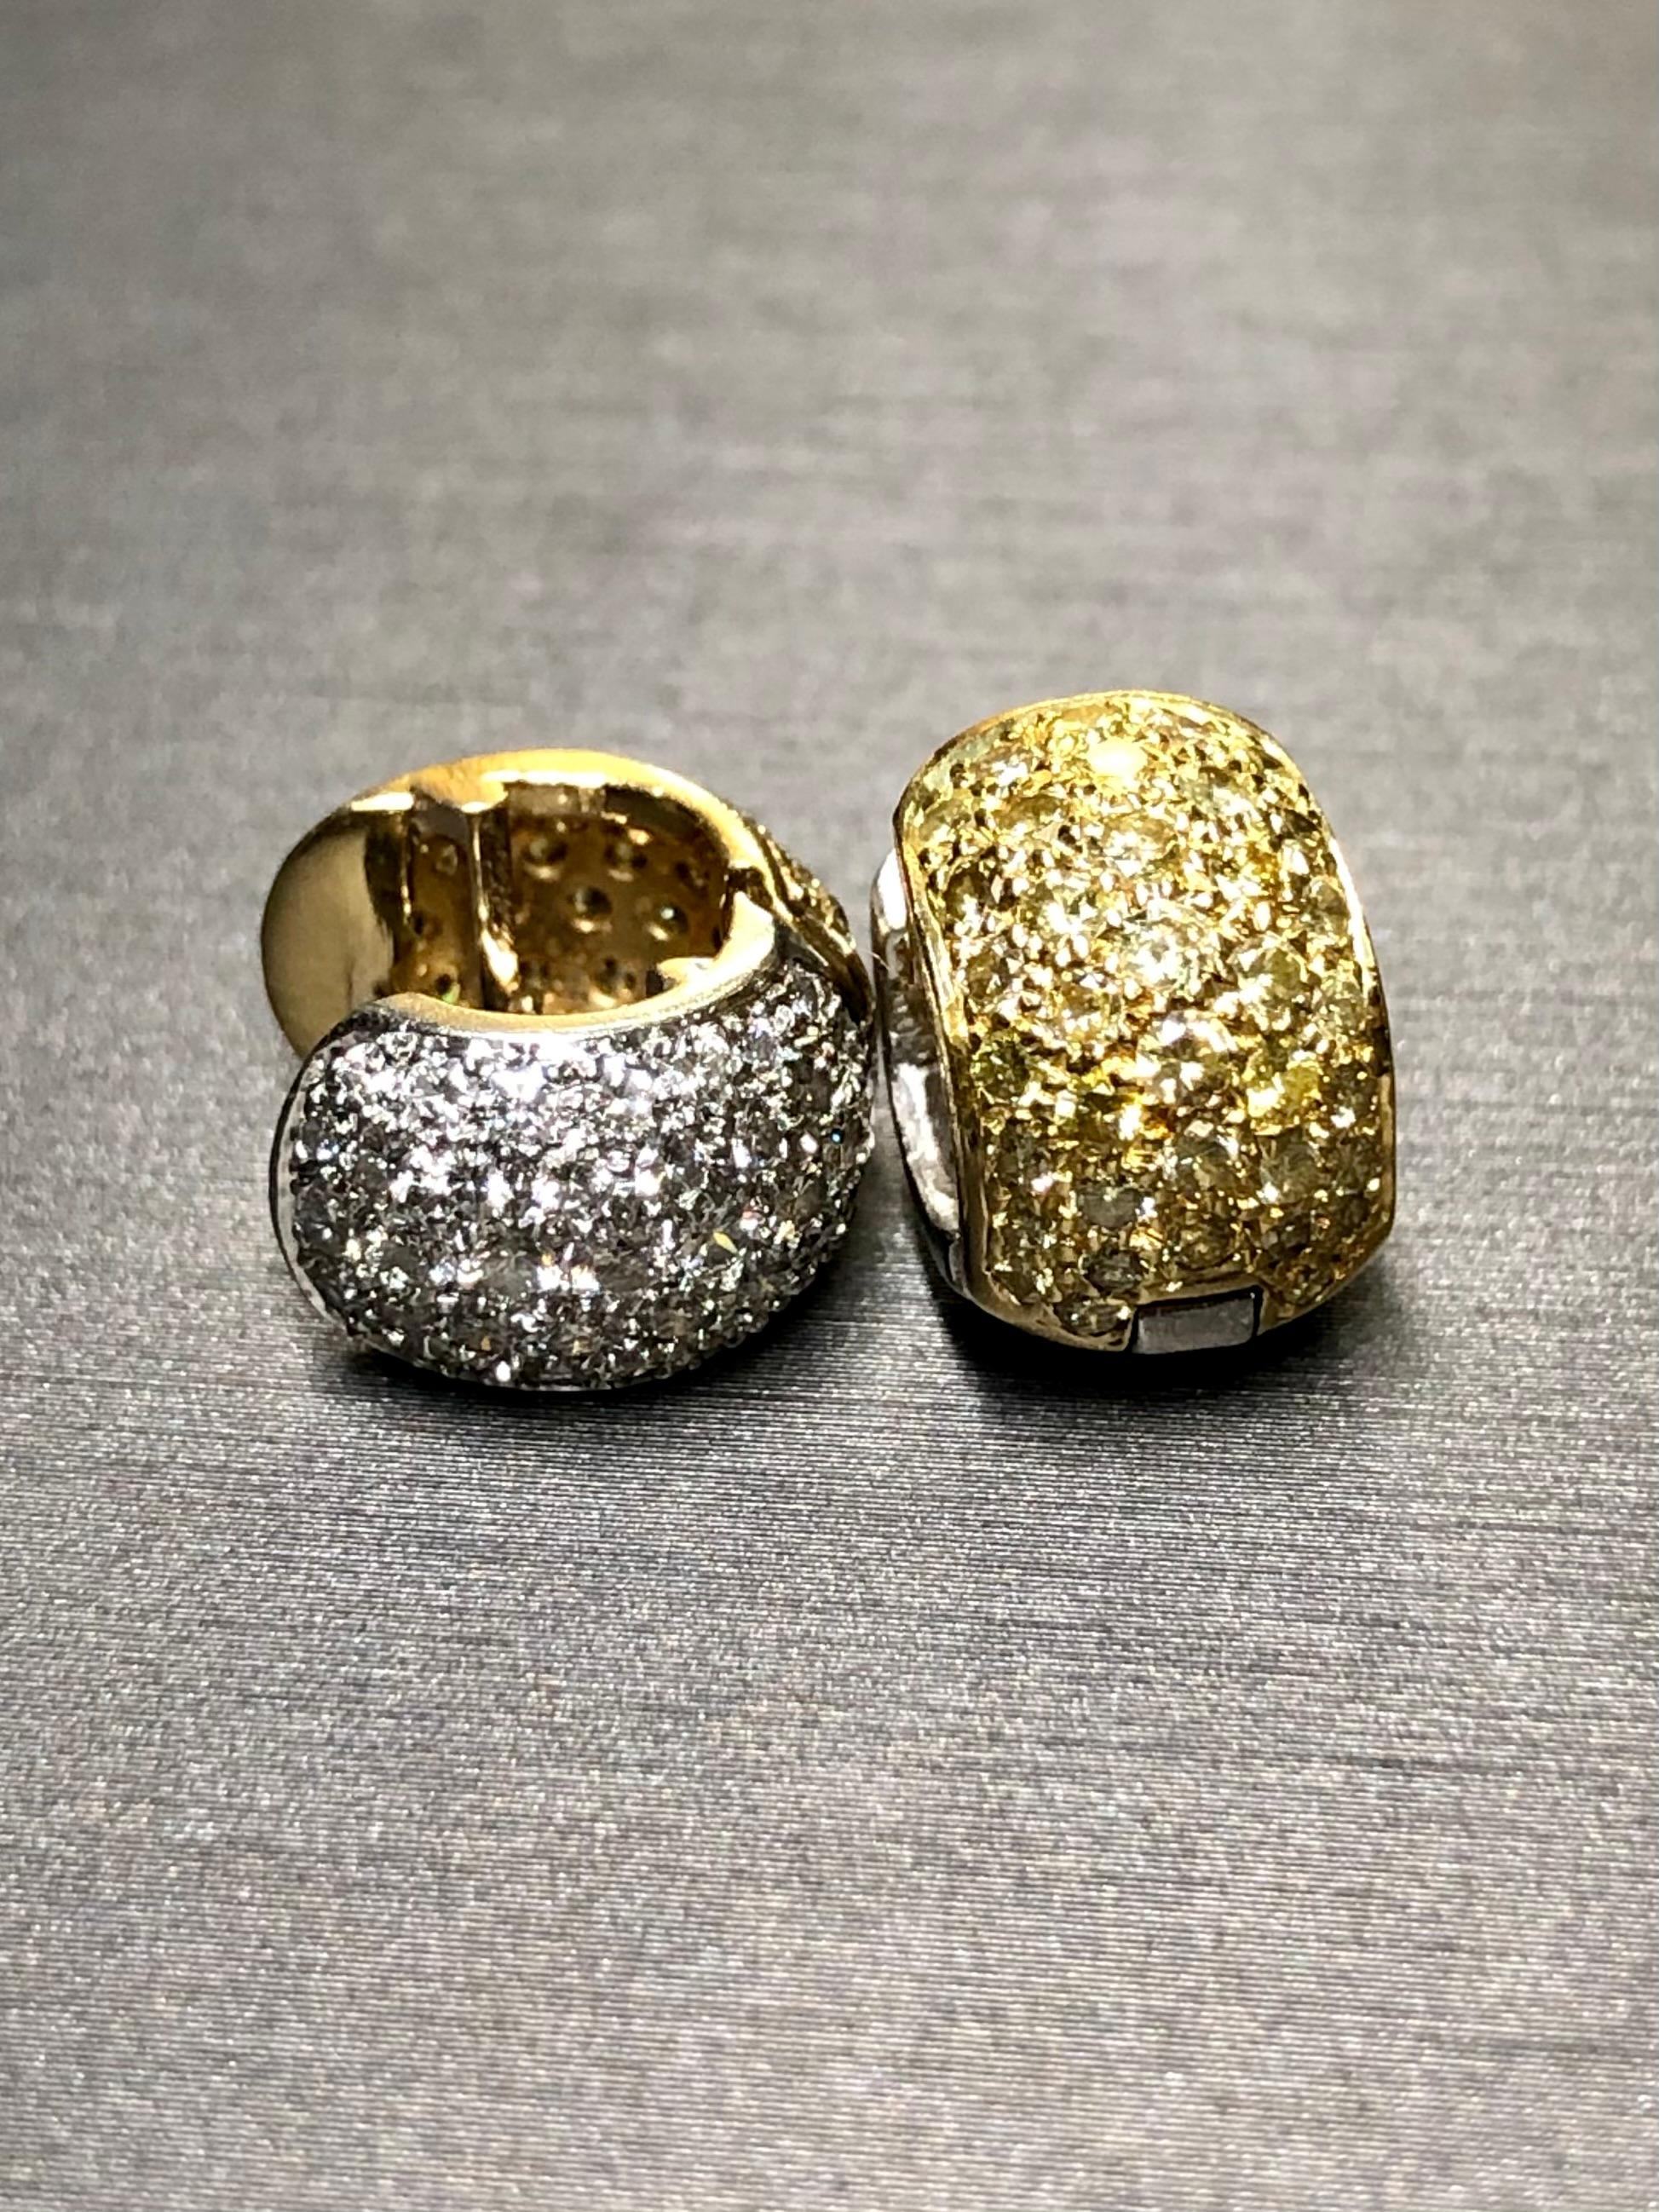 An elegant and understated pair of pavè diamond Huggies crafted in both platinum as well as 18K yellow gold and set with approximately 1.48cttw in fancy yellow diamonds (we strongly believe them to be natural color) as well as 1.48cttw in G-H color